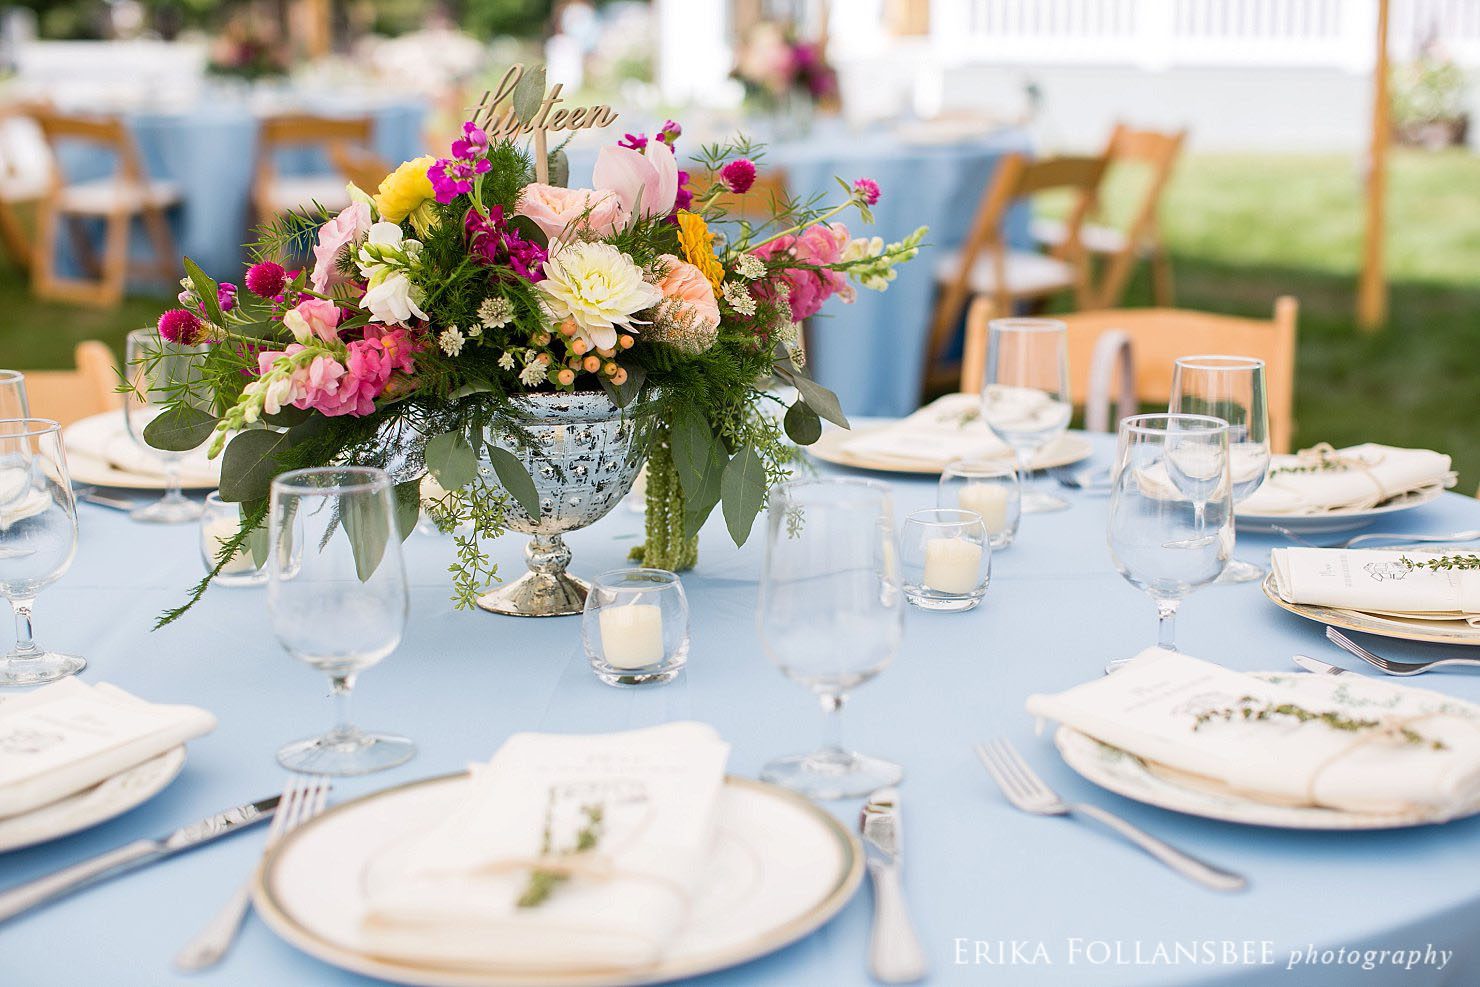 Colorful centerpieces on powder blue tablecloths with mismatched china plates